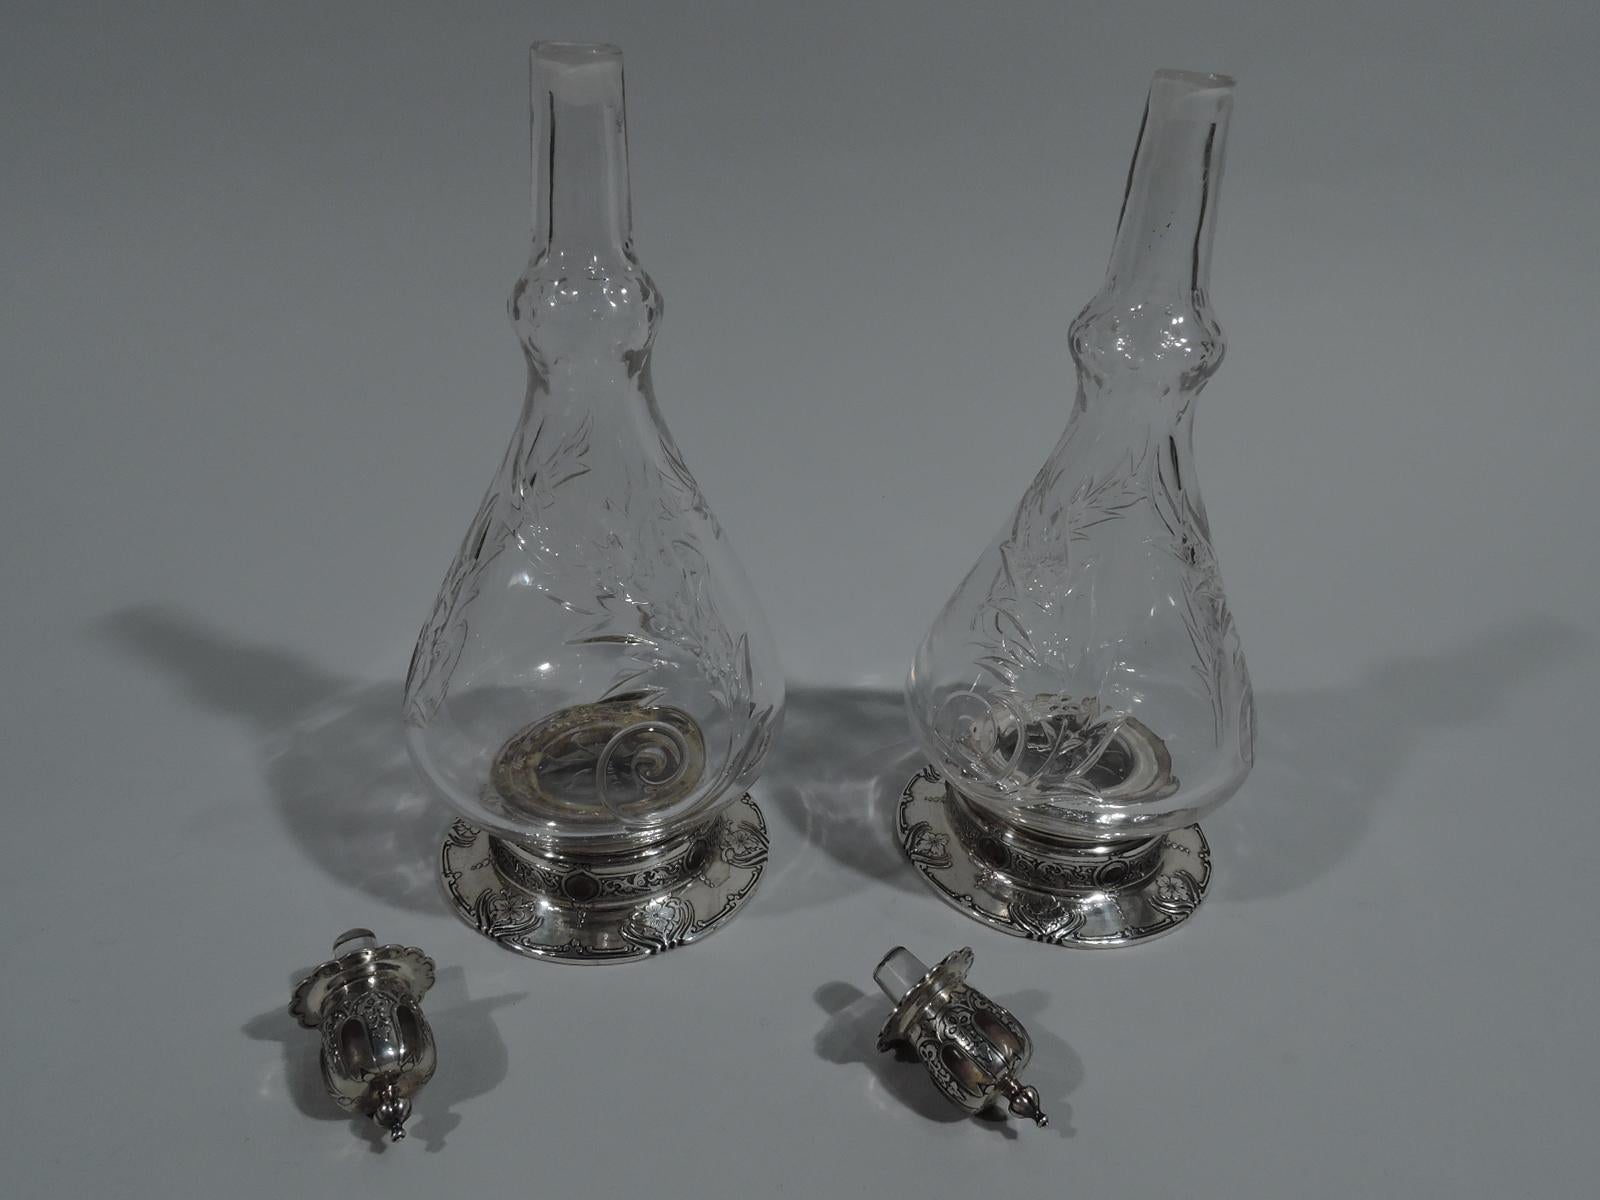 Pair of rare Art Nouveau perfume bottles. Made by Tiffany & Co. in New York, circa 1910. Each: Clear crystal with ovoid body and truncated conical neck terminating in knop. Cut ornament in form of large leafy scrolls and beads. Foot sterling silver